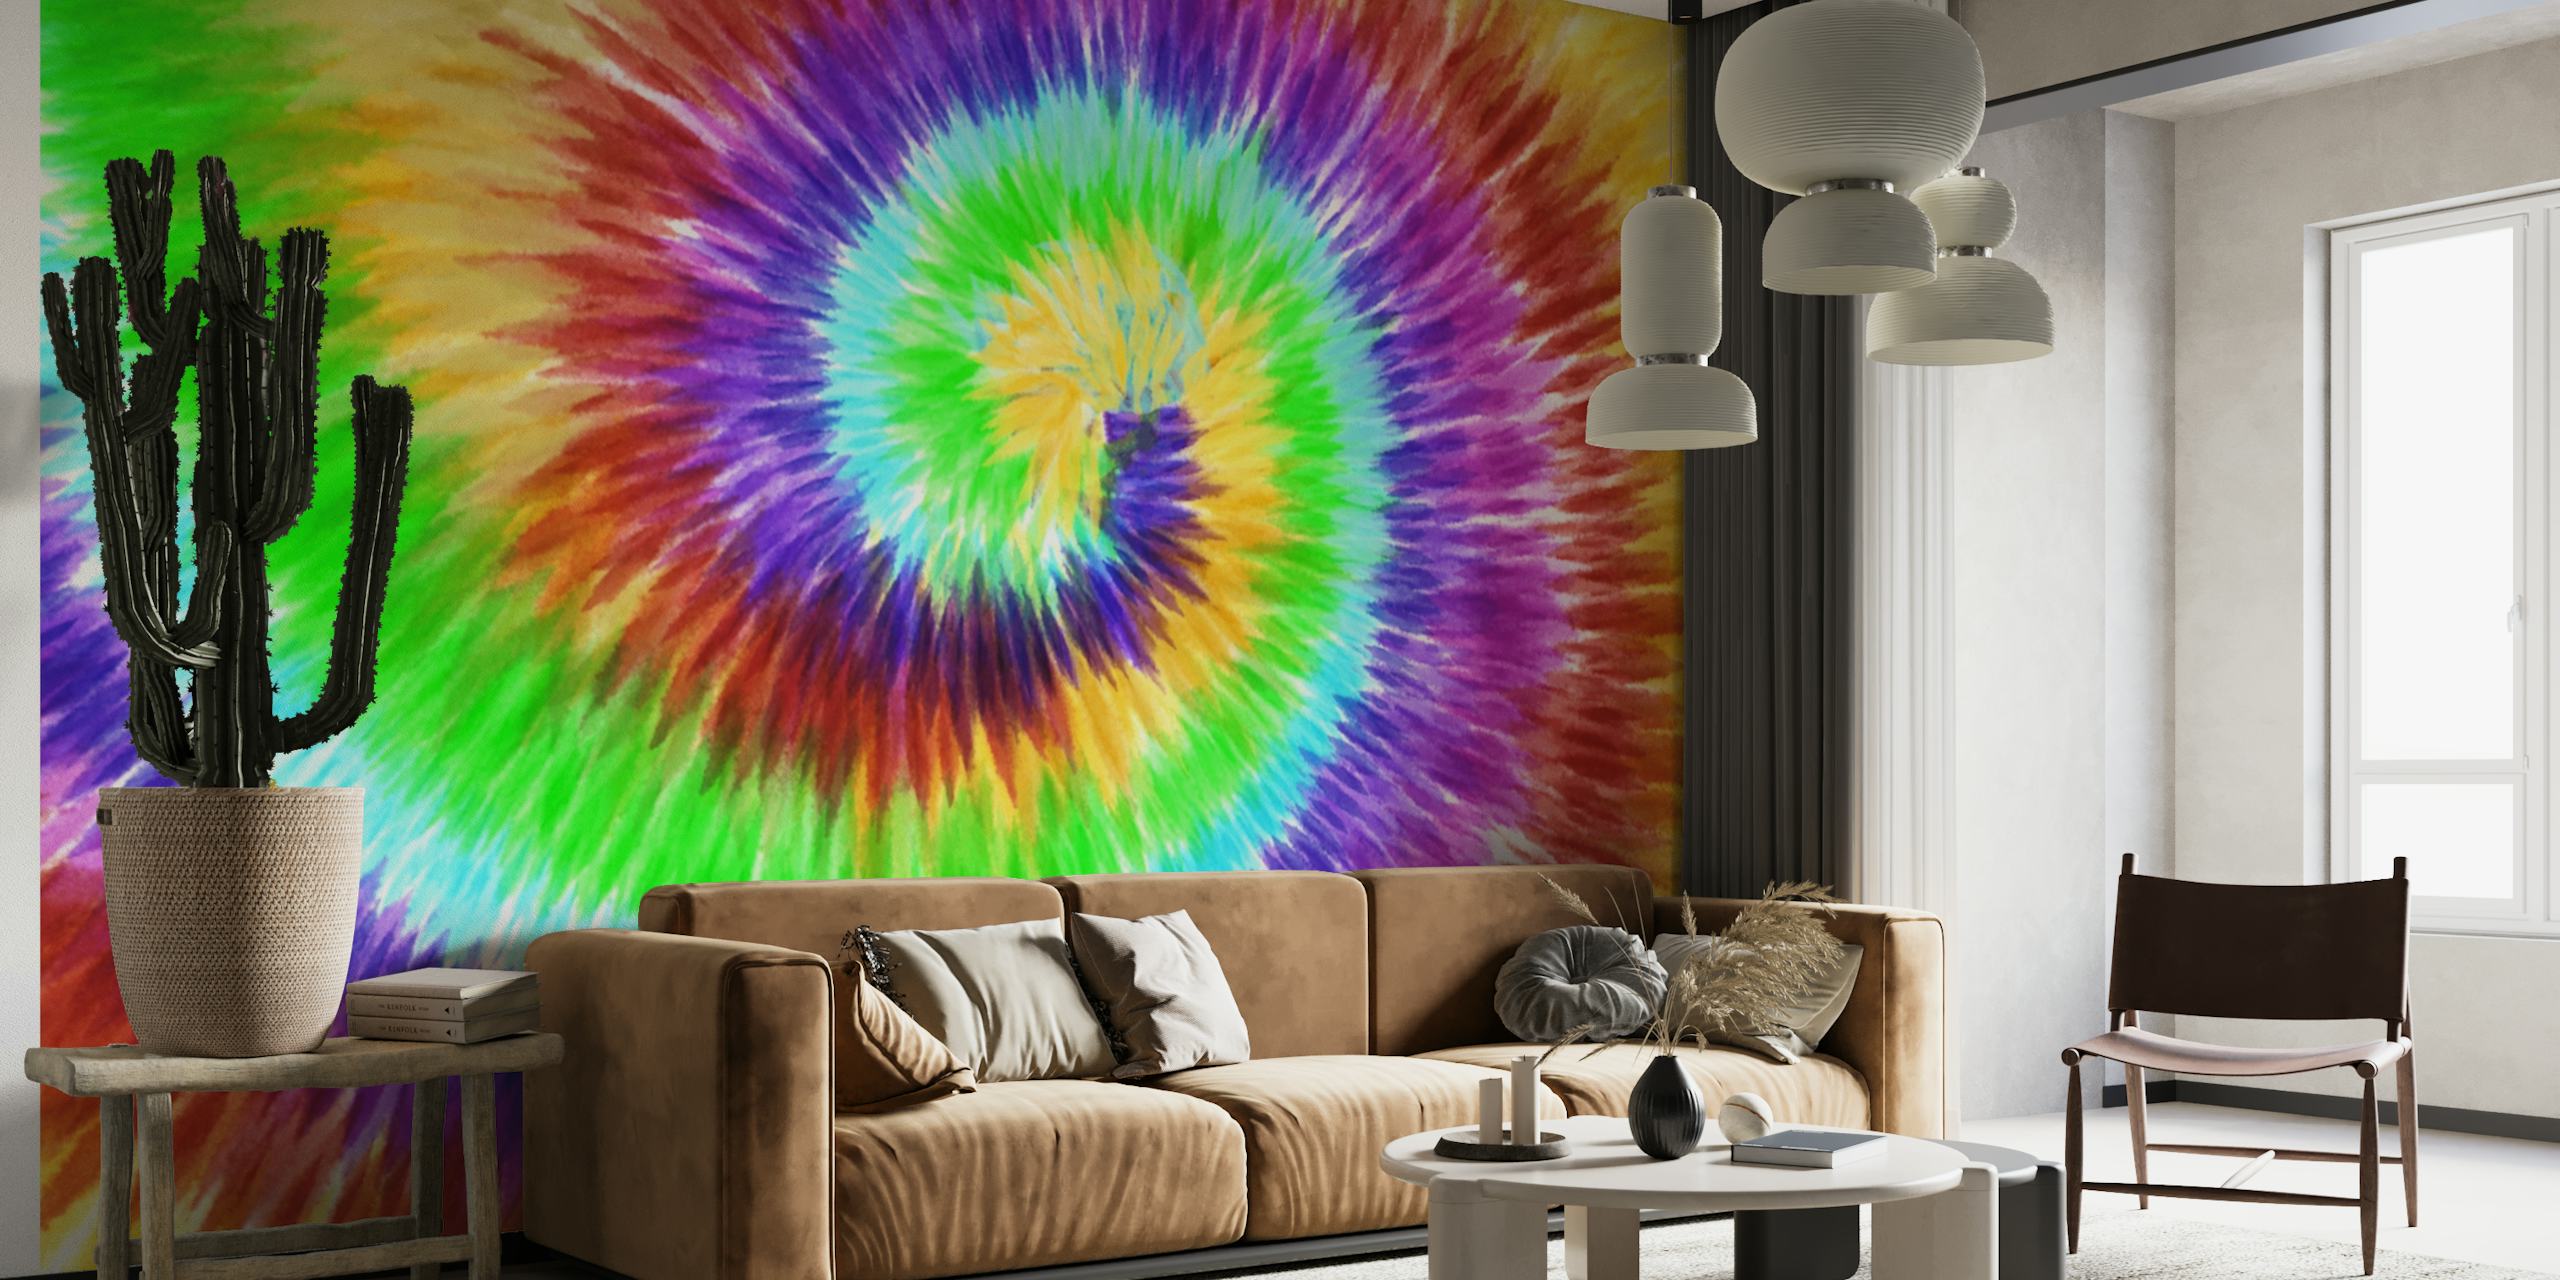 Colorful tie dye spiral wall mural for vibrant room decor